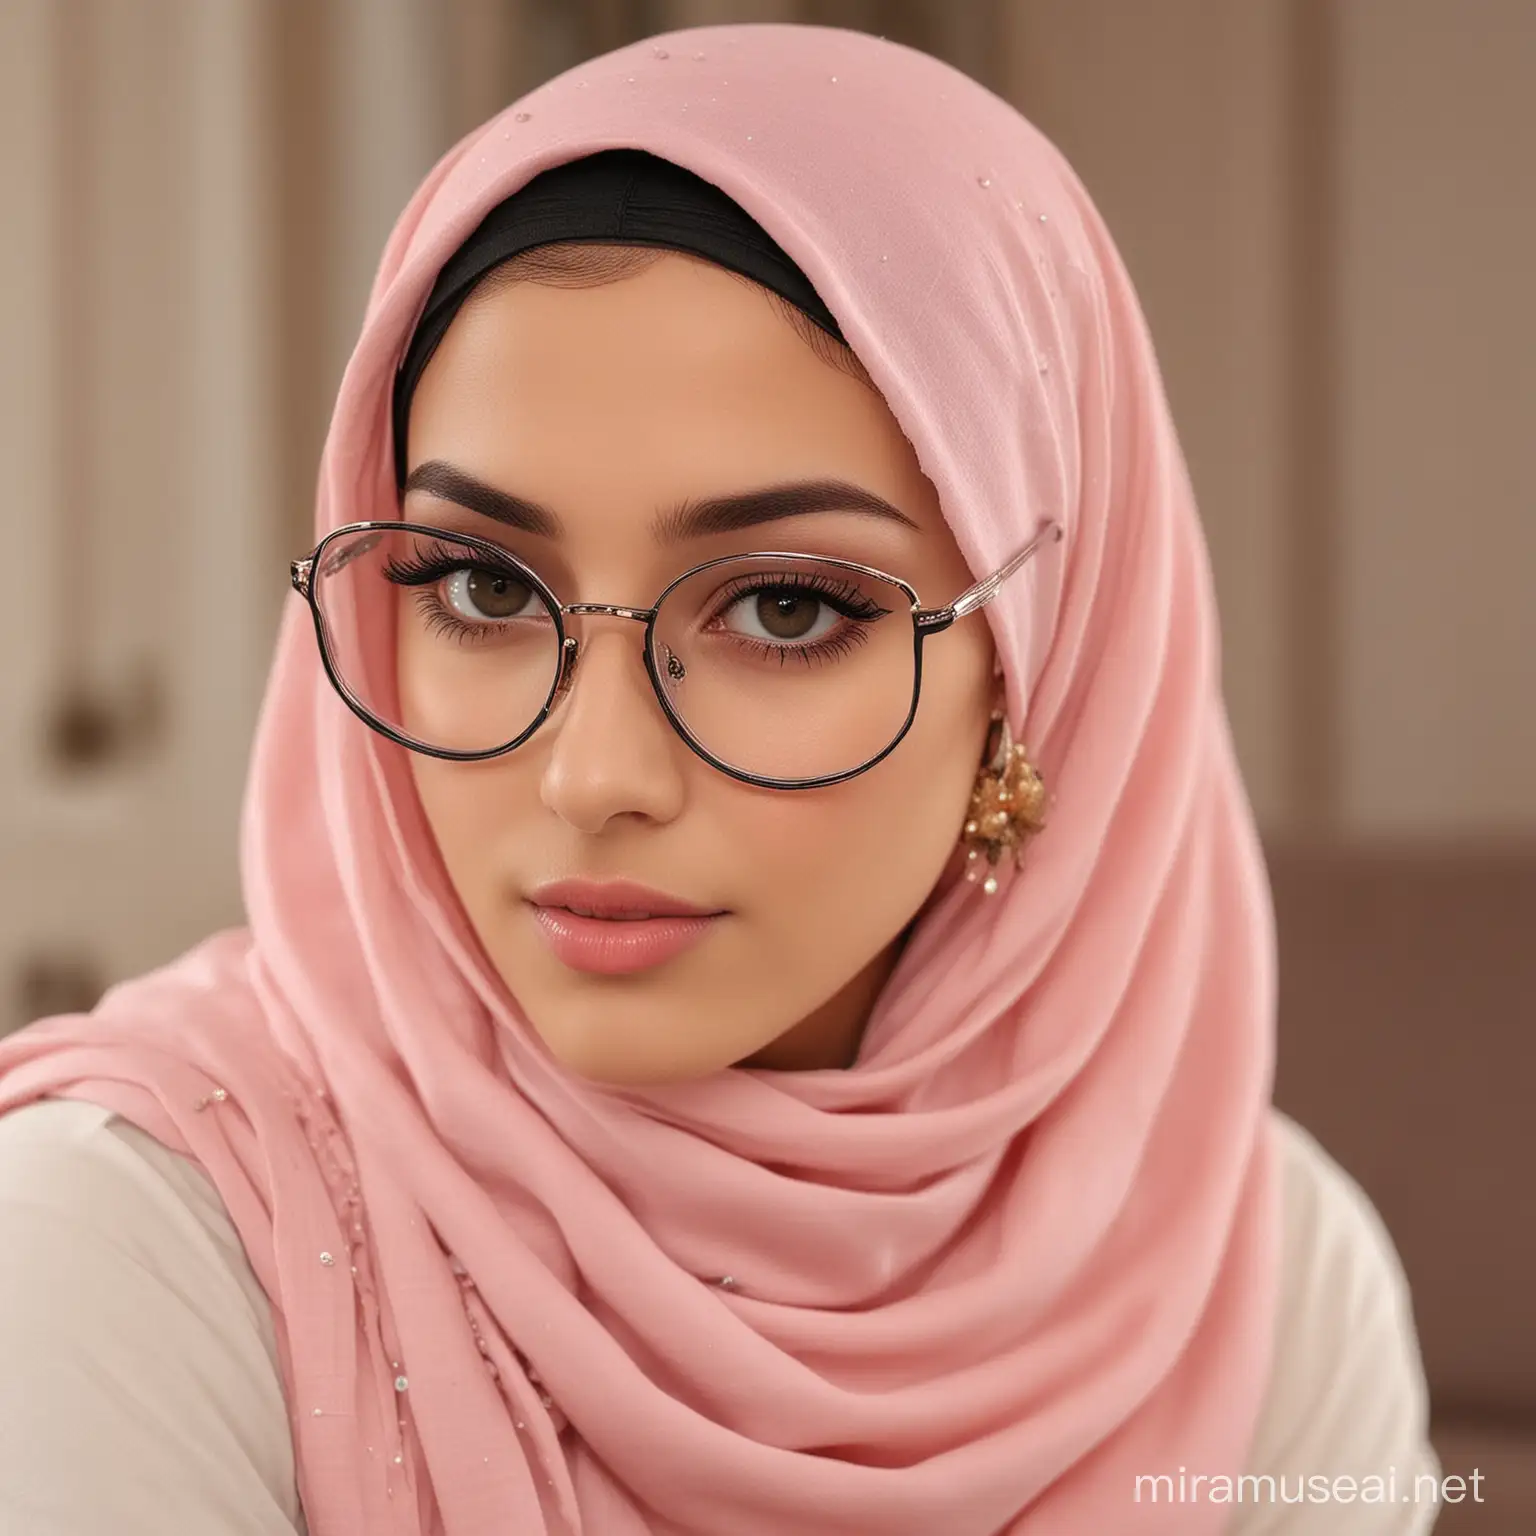 Arabic Girl with Stylist Hijab and Cat Eye Spectacles Sitting in Luxurious Living Room